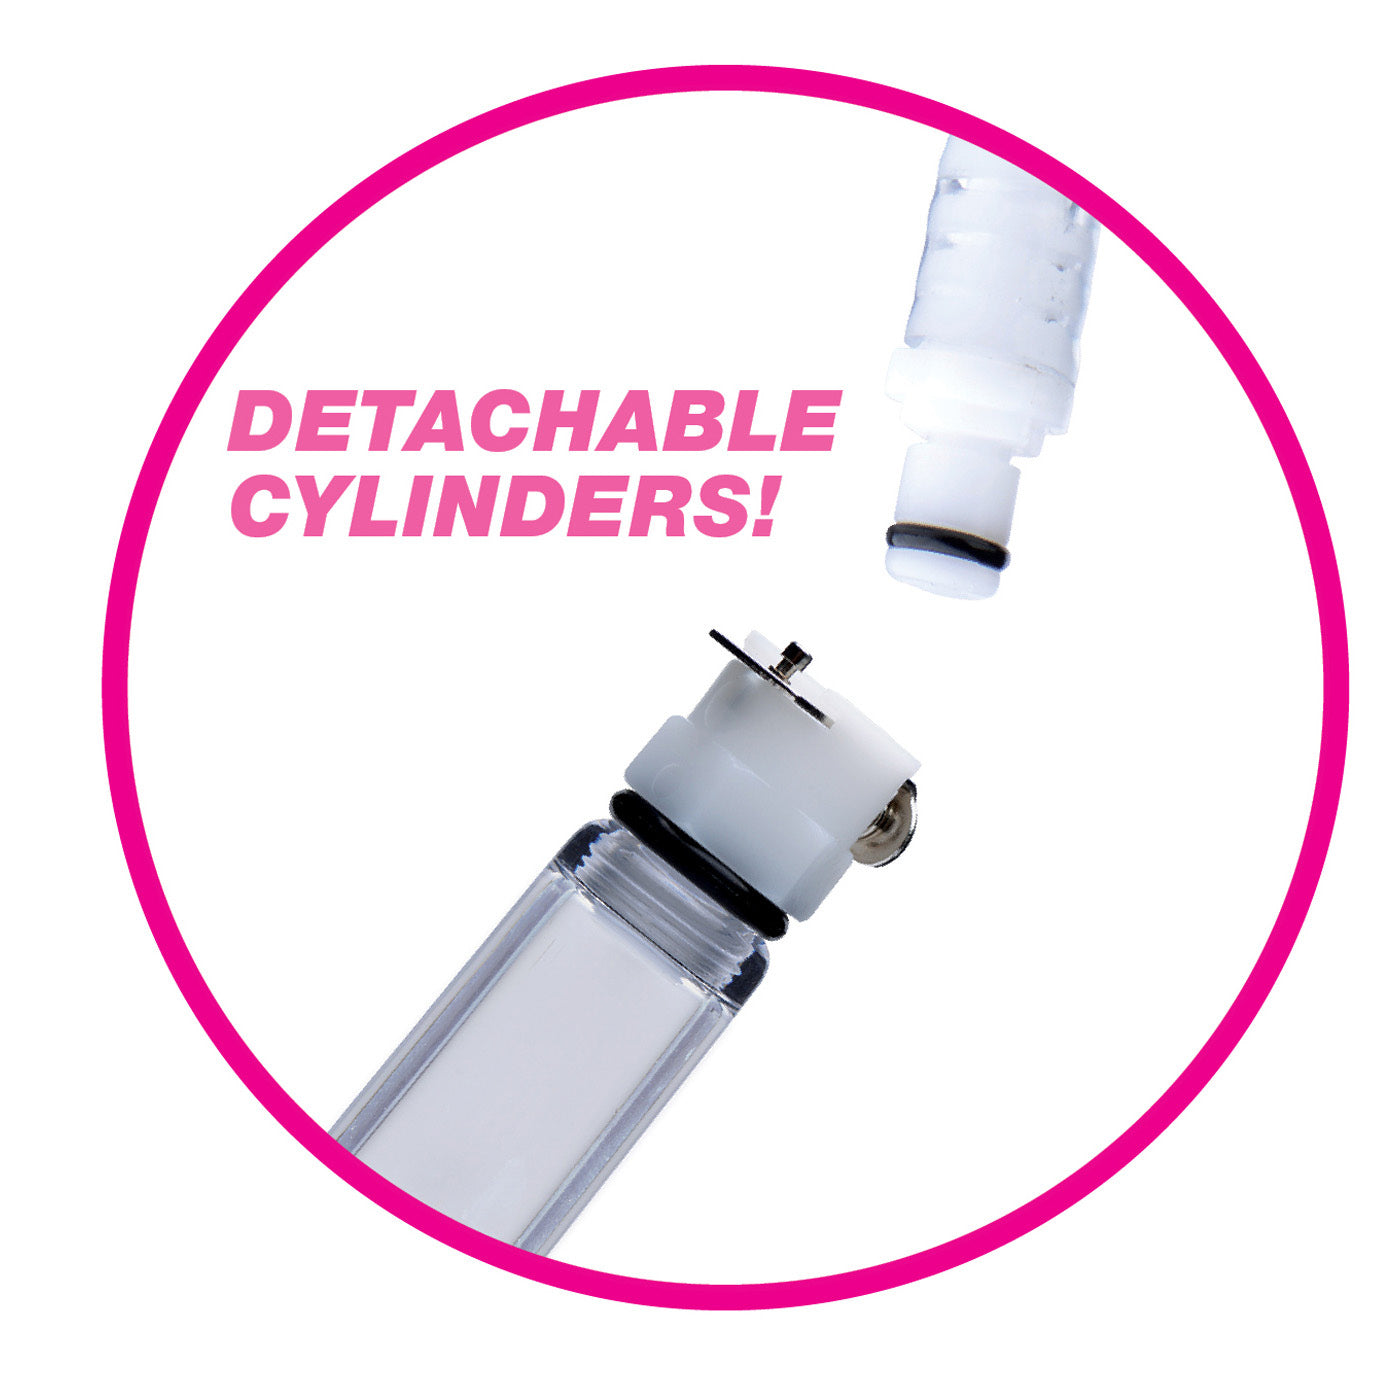 Nipple Pumping System with Dual Detachable Acrylic Cylinders - UABDSM